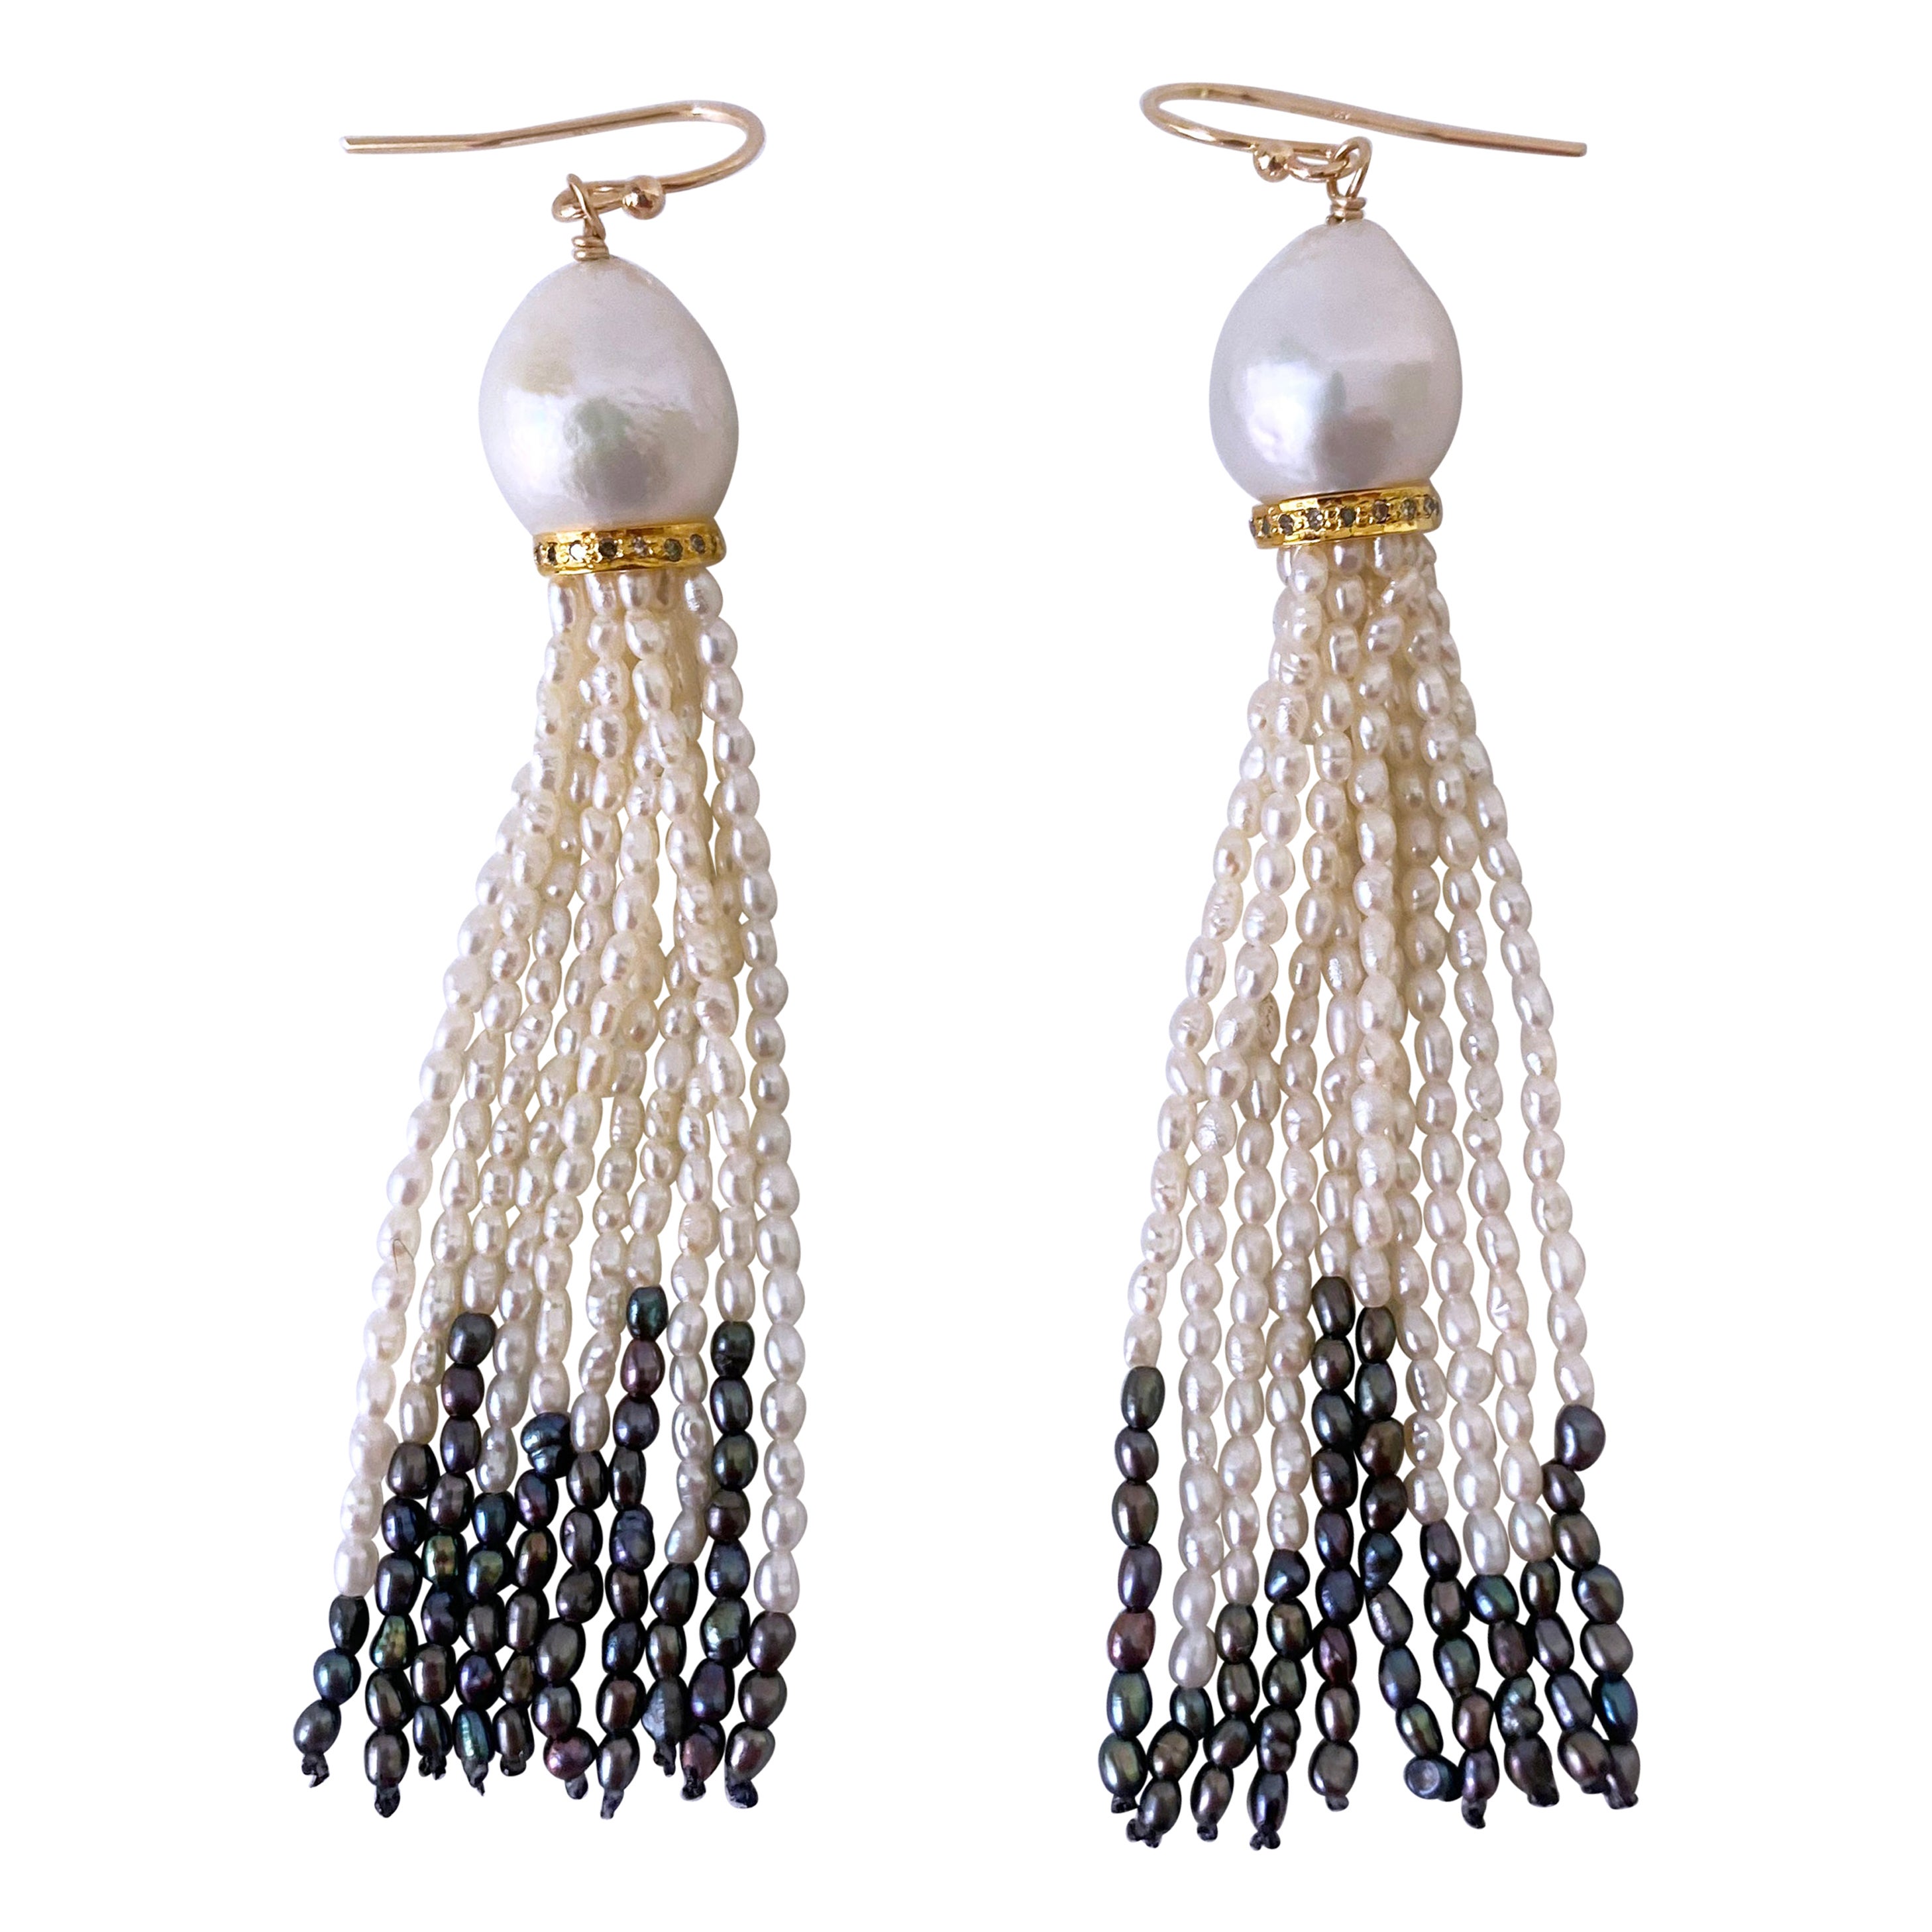 Marina J. Solid 14k & Pearl Earrings with Ombre Tassels For Sale